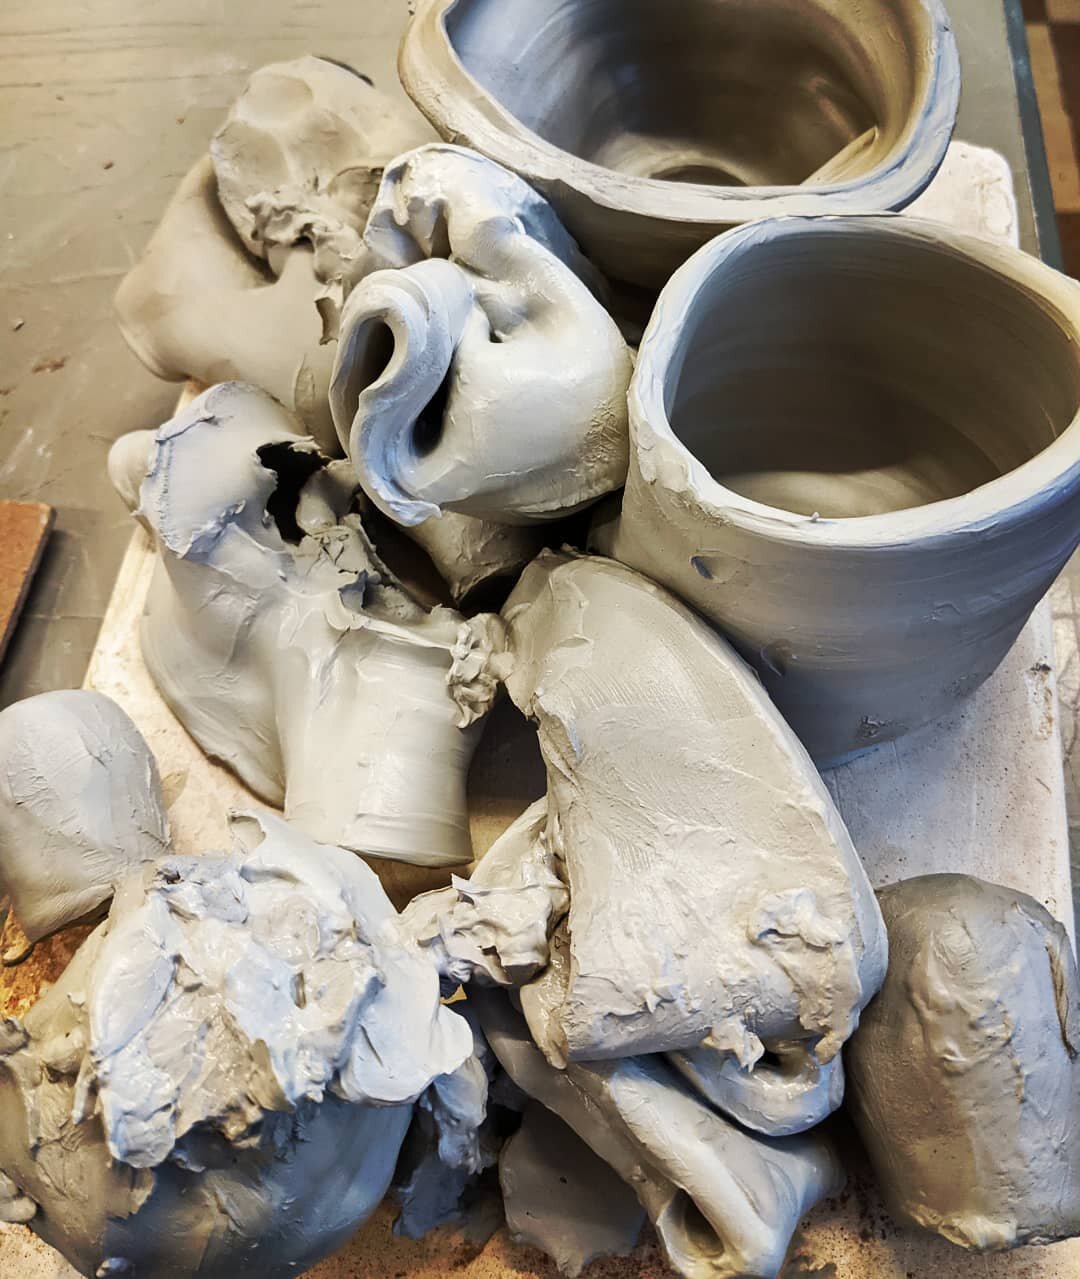 First Throwing class since March 2020 Lovely to have people back in the studio up to their arms in it!

#potteryclass #claystudio #throwingclay